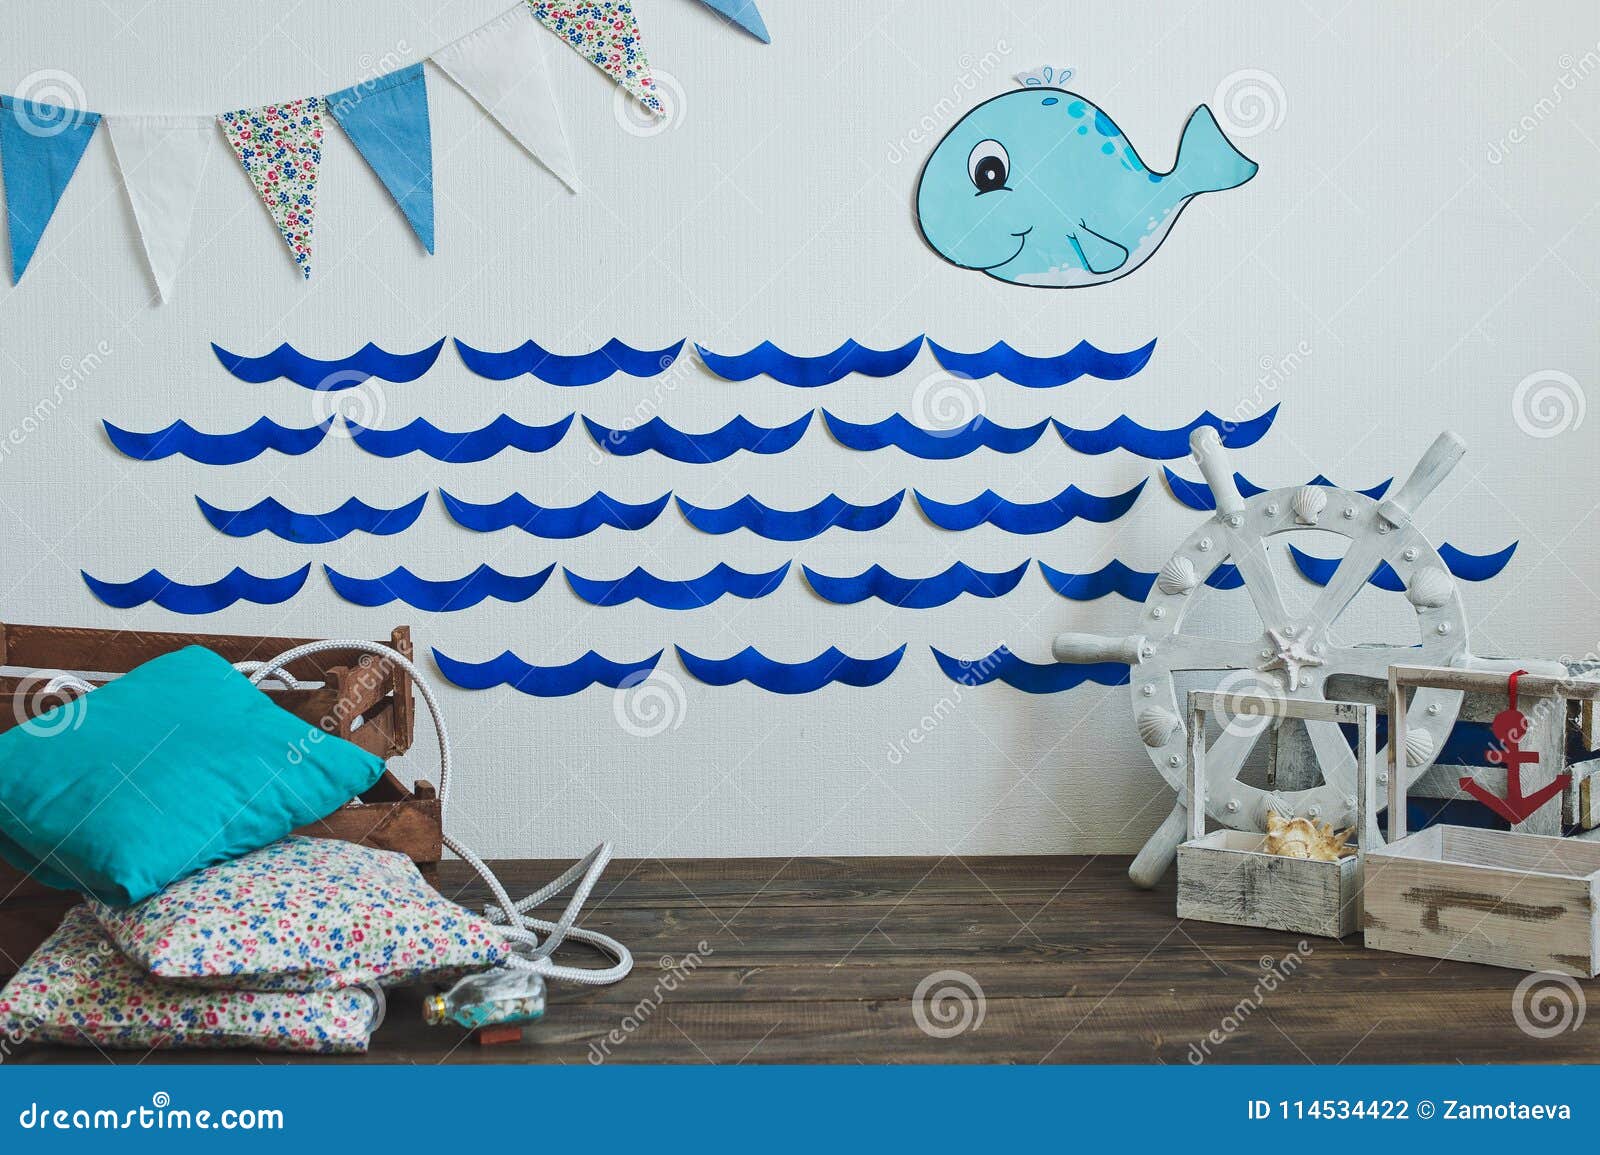 The Backdrop for Photos with a Nautical Theme 5504. Stock Photo - Image of  playing, people: 114534422